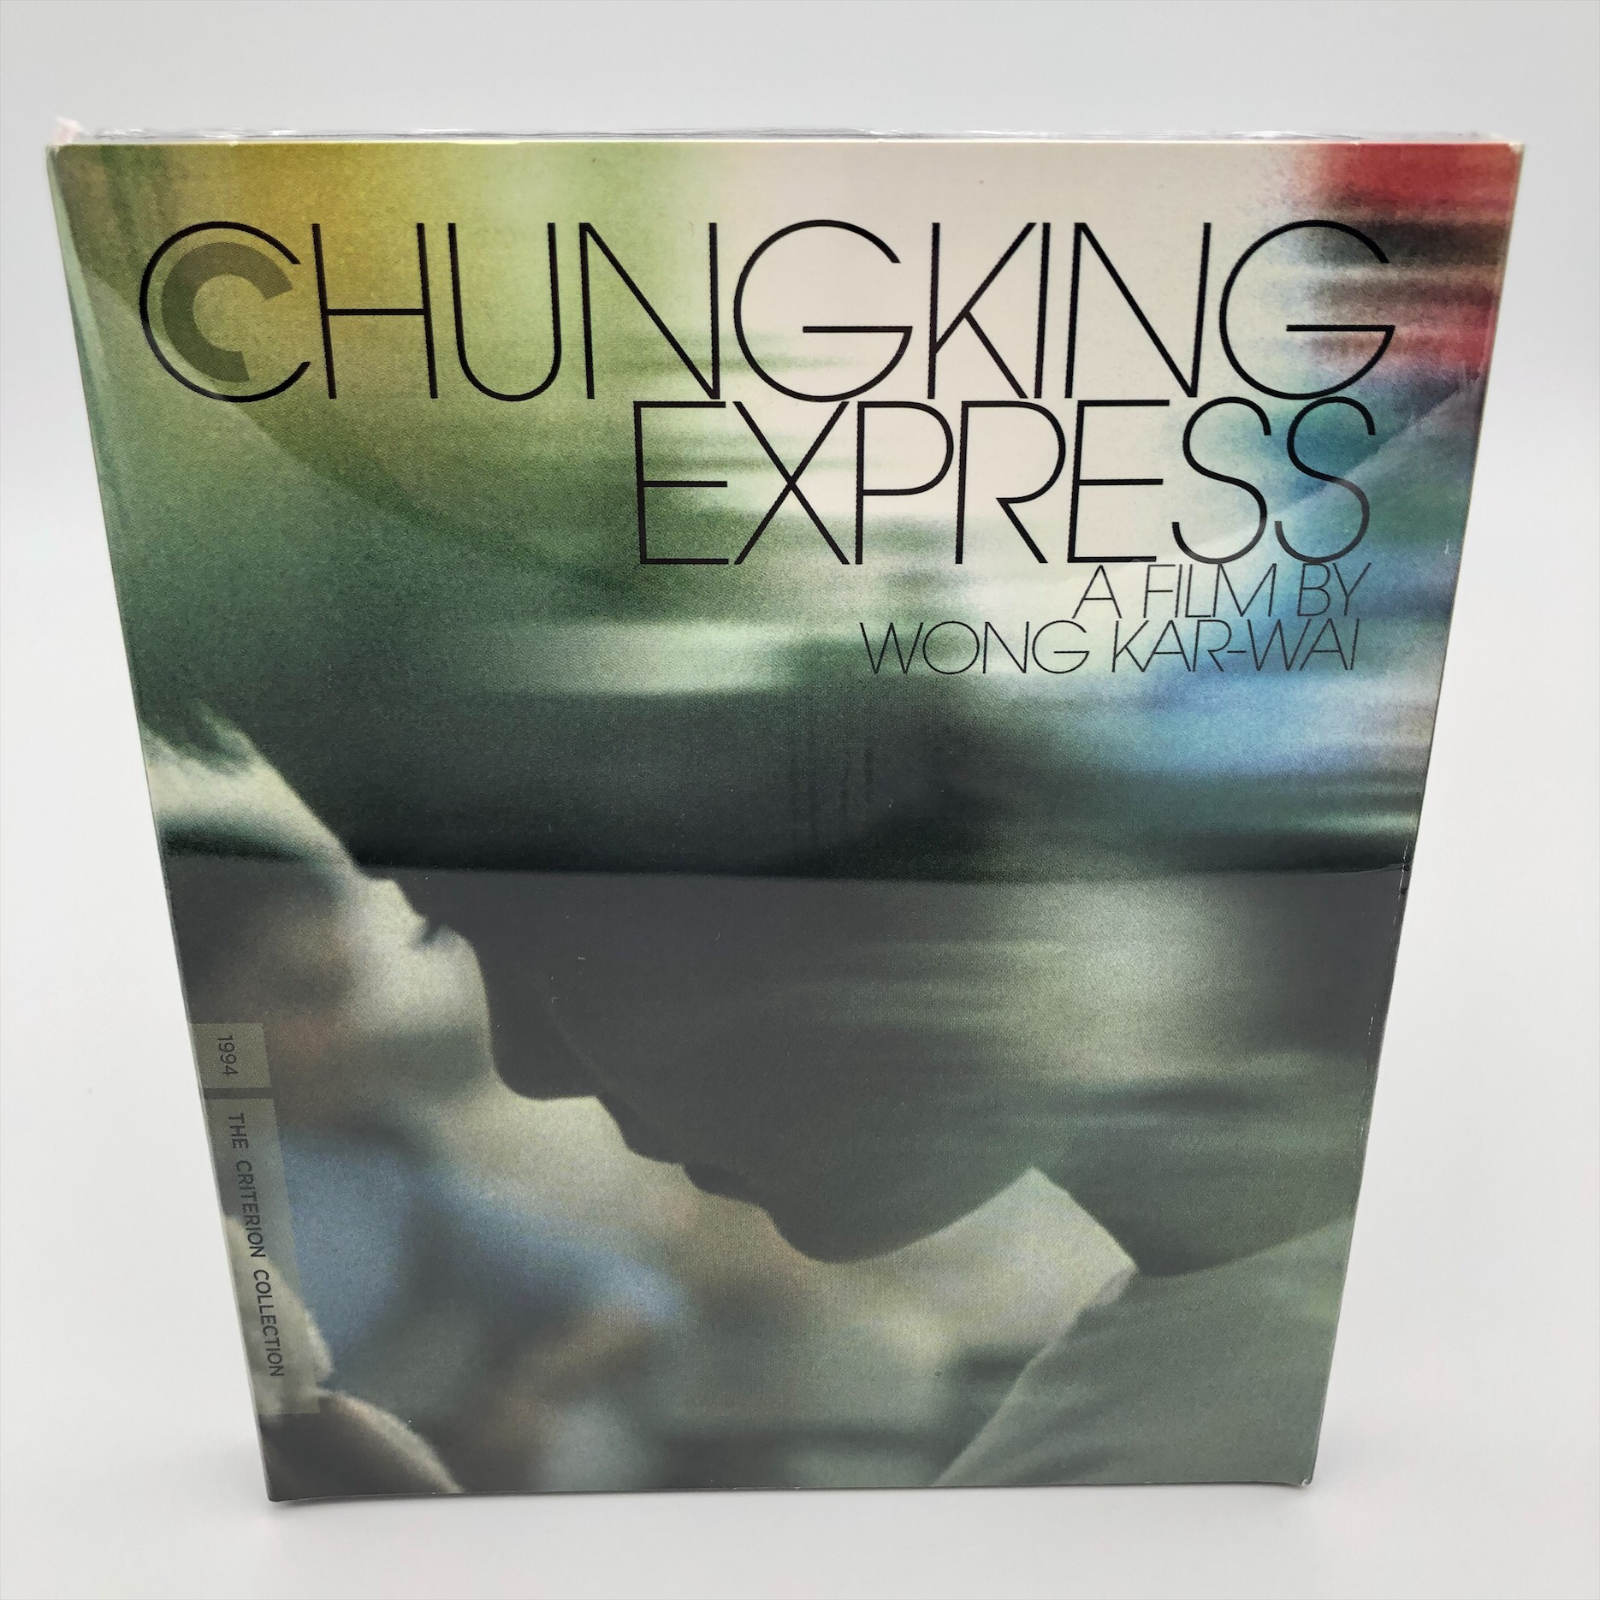 Chungking Express The Criterion Collection on Blu-ray